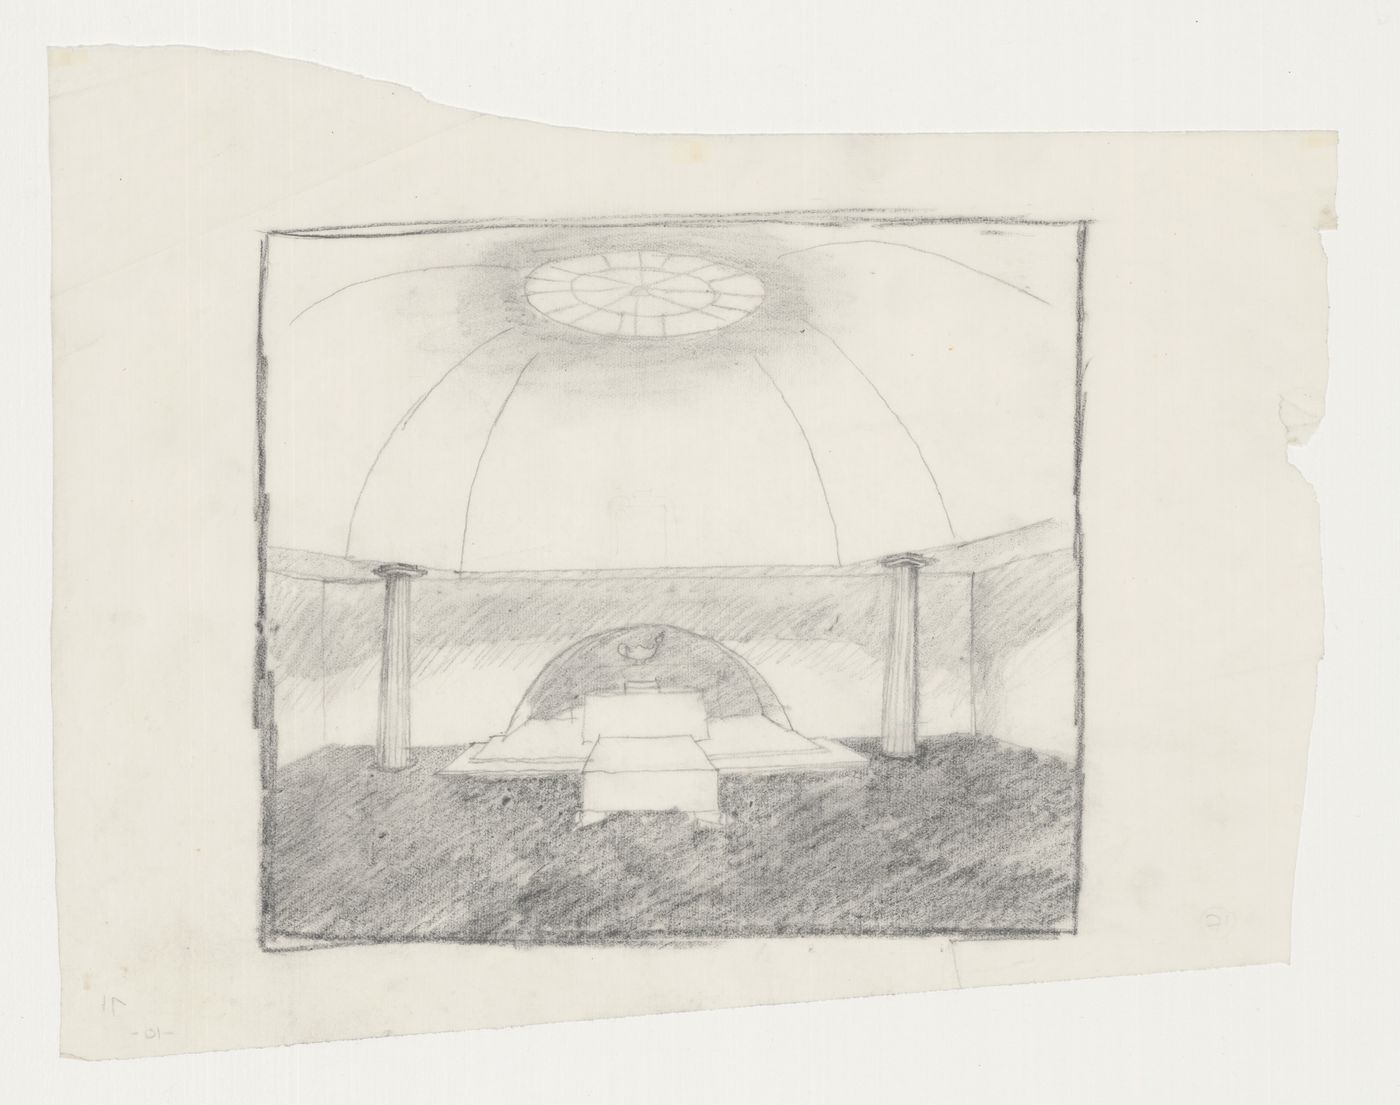 Interior sketch perspective for Woodland Chapel showing the altar and catafalque, Woodland Cemetery, Stockholm, Sweden